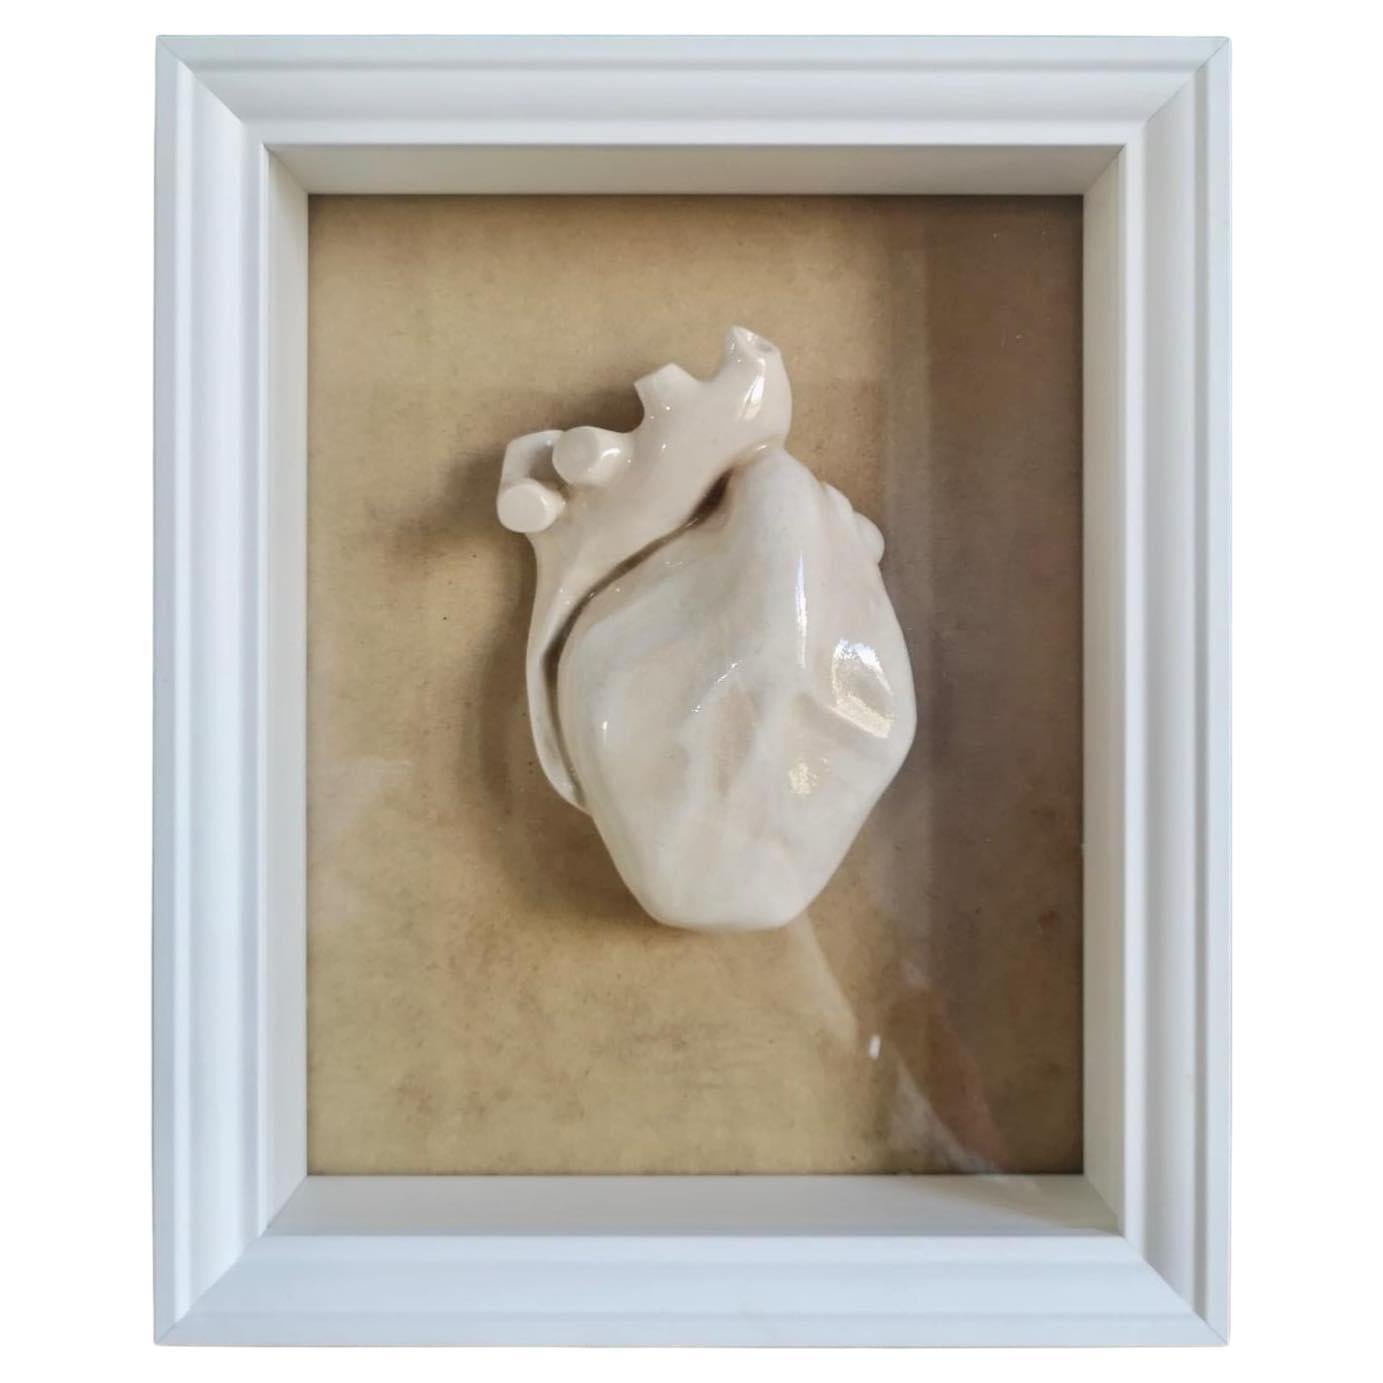 Heart Shaped White "Frame", 2022, Handmade in Italy, Anatomical Unique Piece